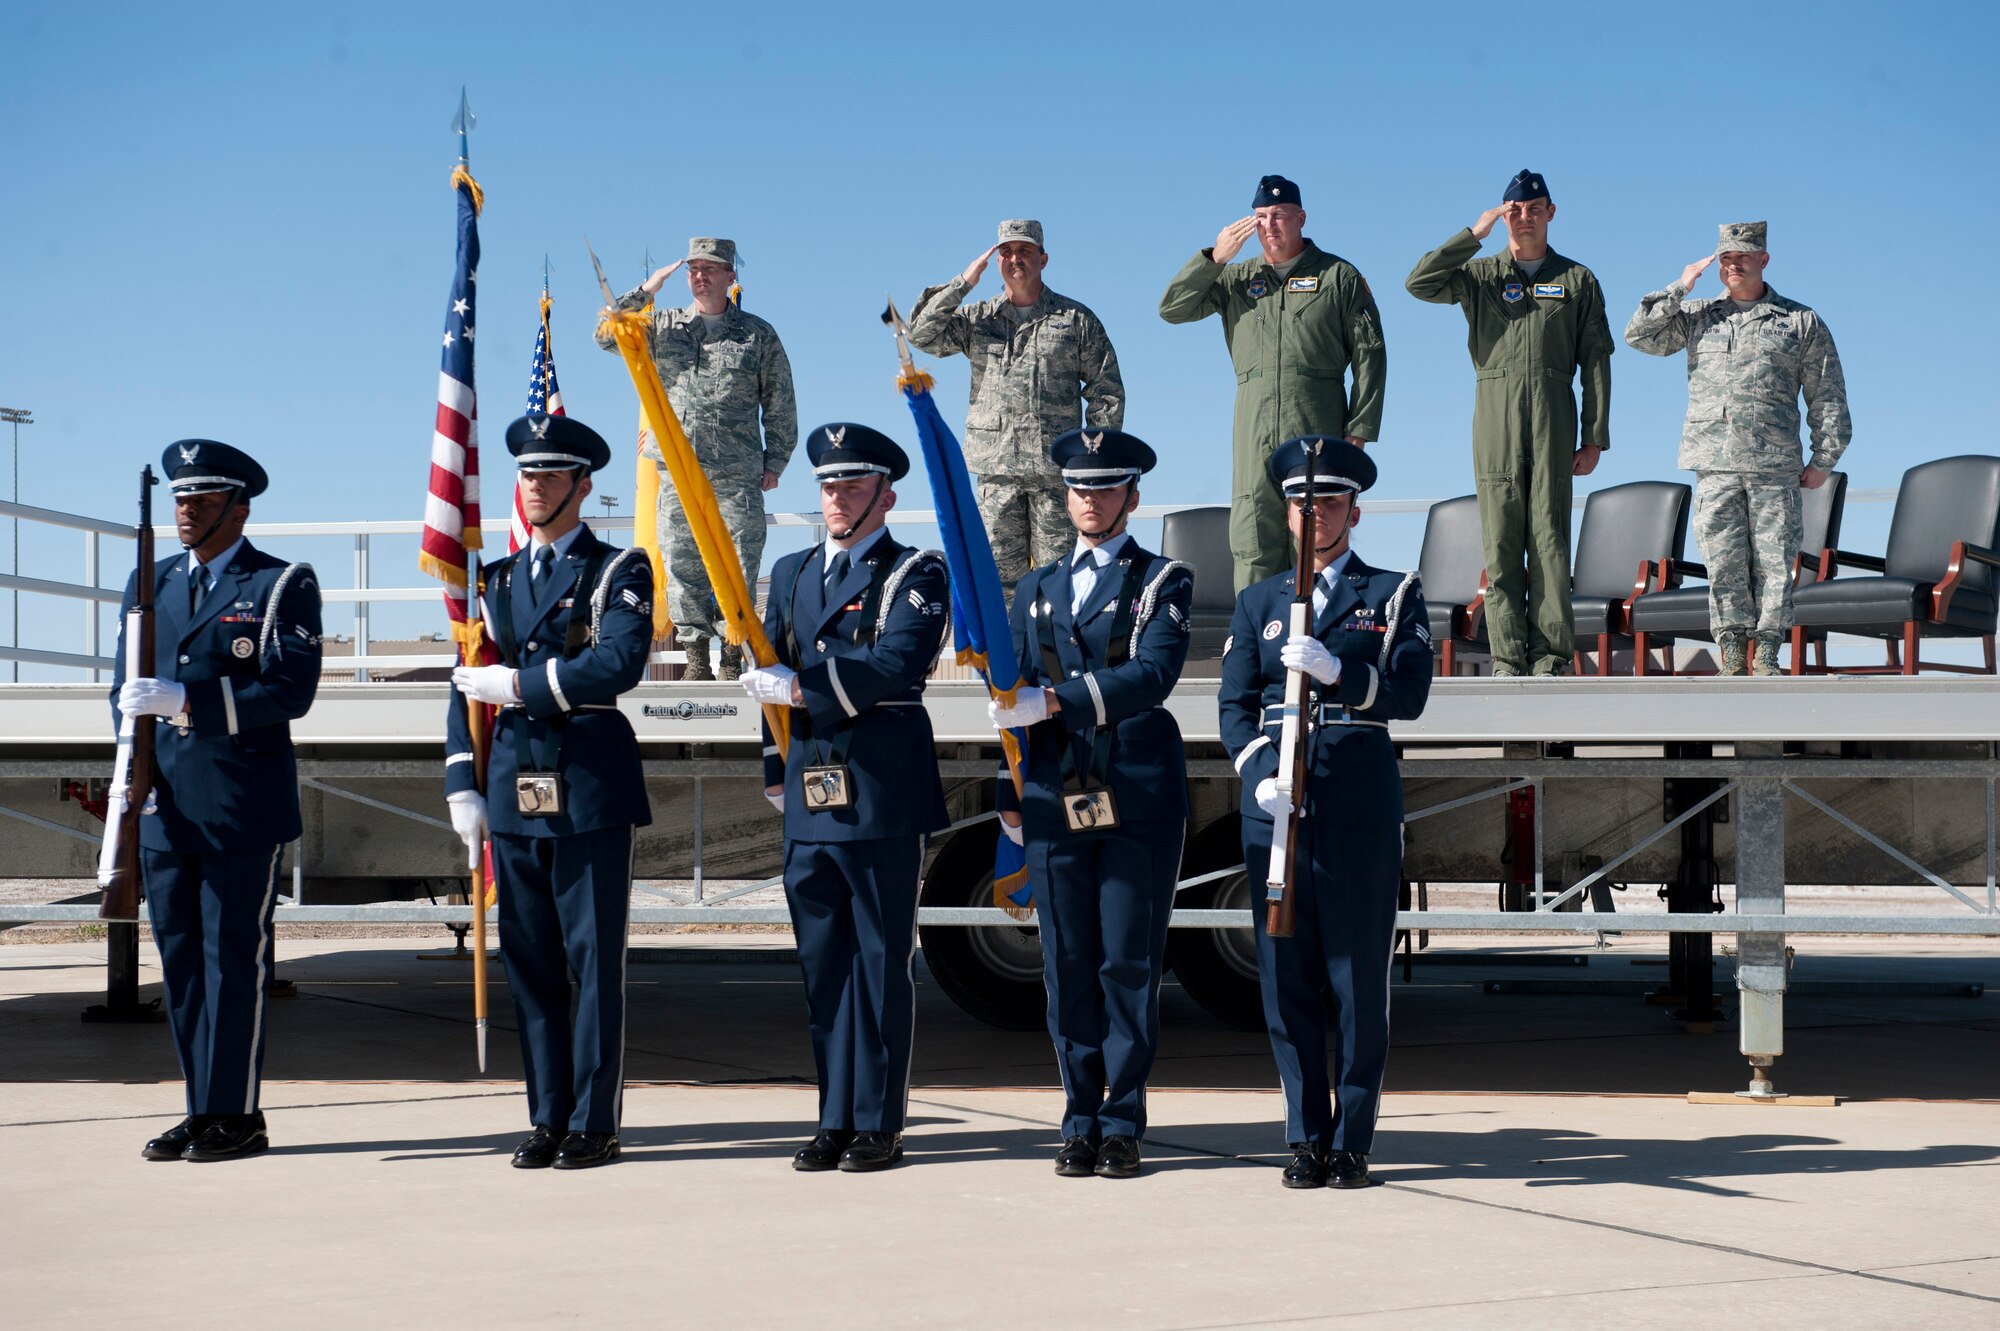 Members of the Steel Talons Honor Guard presented the colors during the 54th Fighter Group activation ceremony at Holloman Air Force Base, N.M., March 11. The 54th Fighter Group, a tenant unit at Holloman, is a detachment of the 56th Fighter Wing at Luke Air Force Base, Ariz., and will ultimately operate two F-16 Fighting Falcon aircraft training squadrons. The 54th Fighter Group plus three squadrons were activated at the ceremony: the 311th Fighter Squadron, the 54th Operations Support Squadron and the 54th Aircraft Maintenance Squadron. (U.S. Air Force photo by Senior Airman Daniel E. Liddicoet/Released)